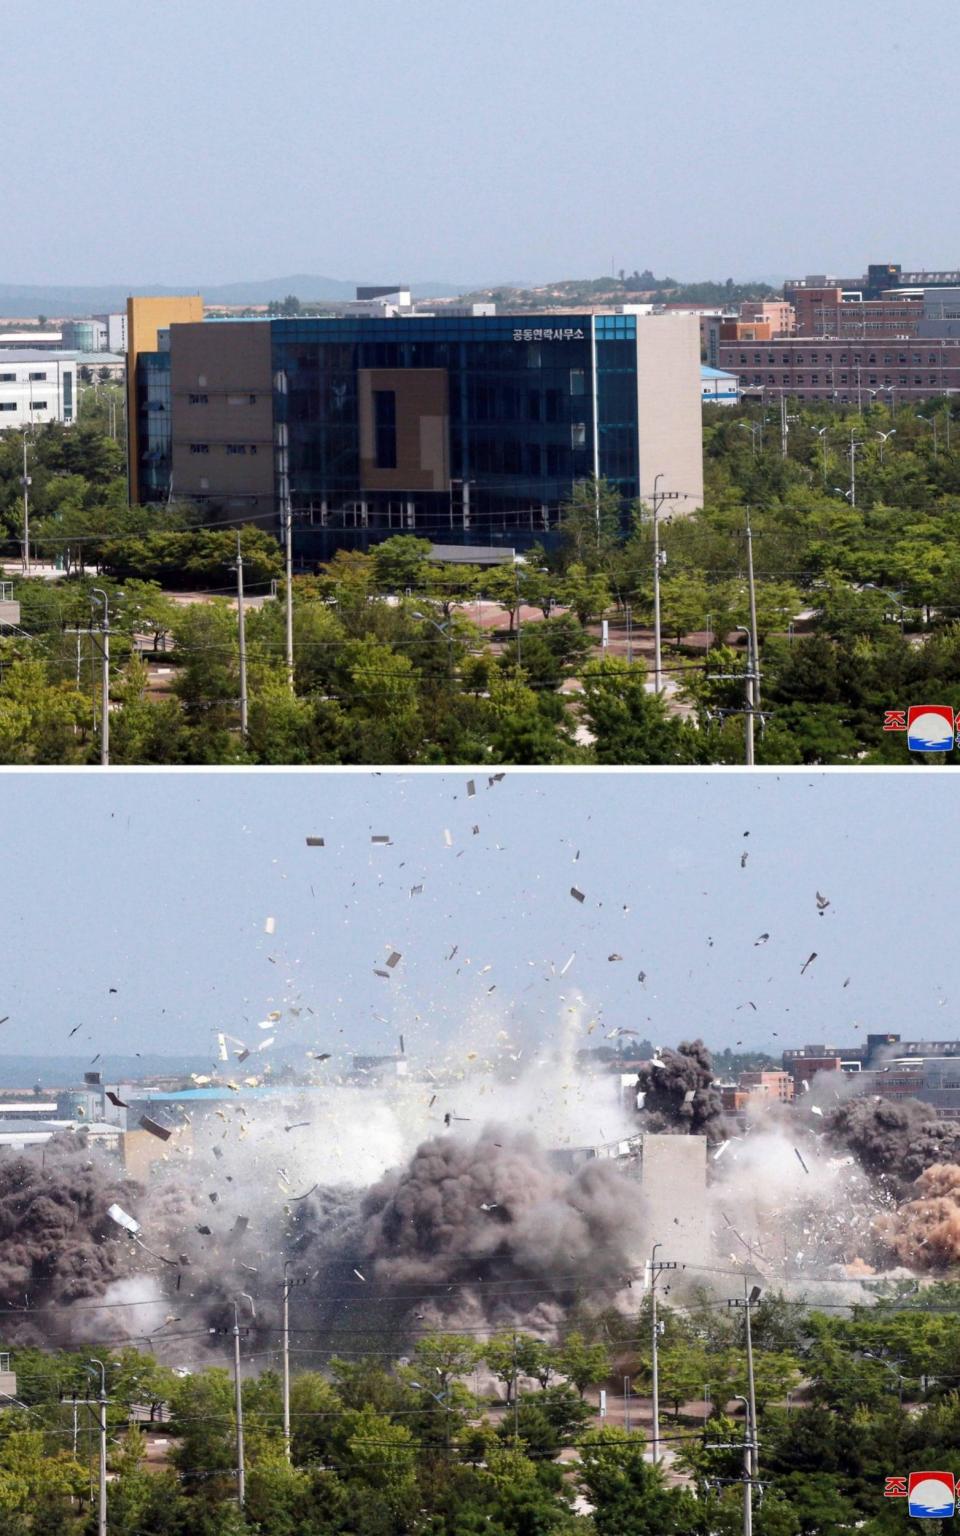 The liaison office before and after the explosion  - Newscom / Alamy Live News 